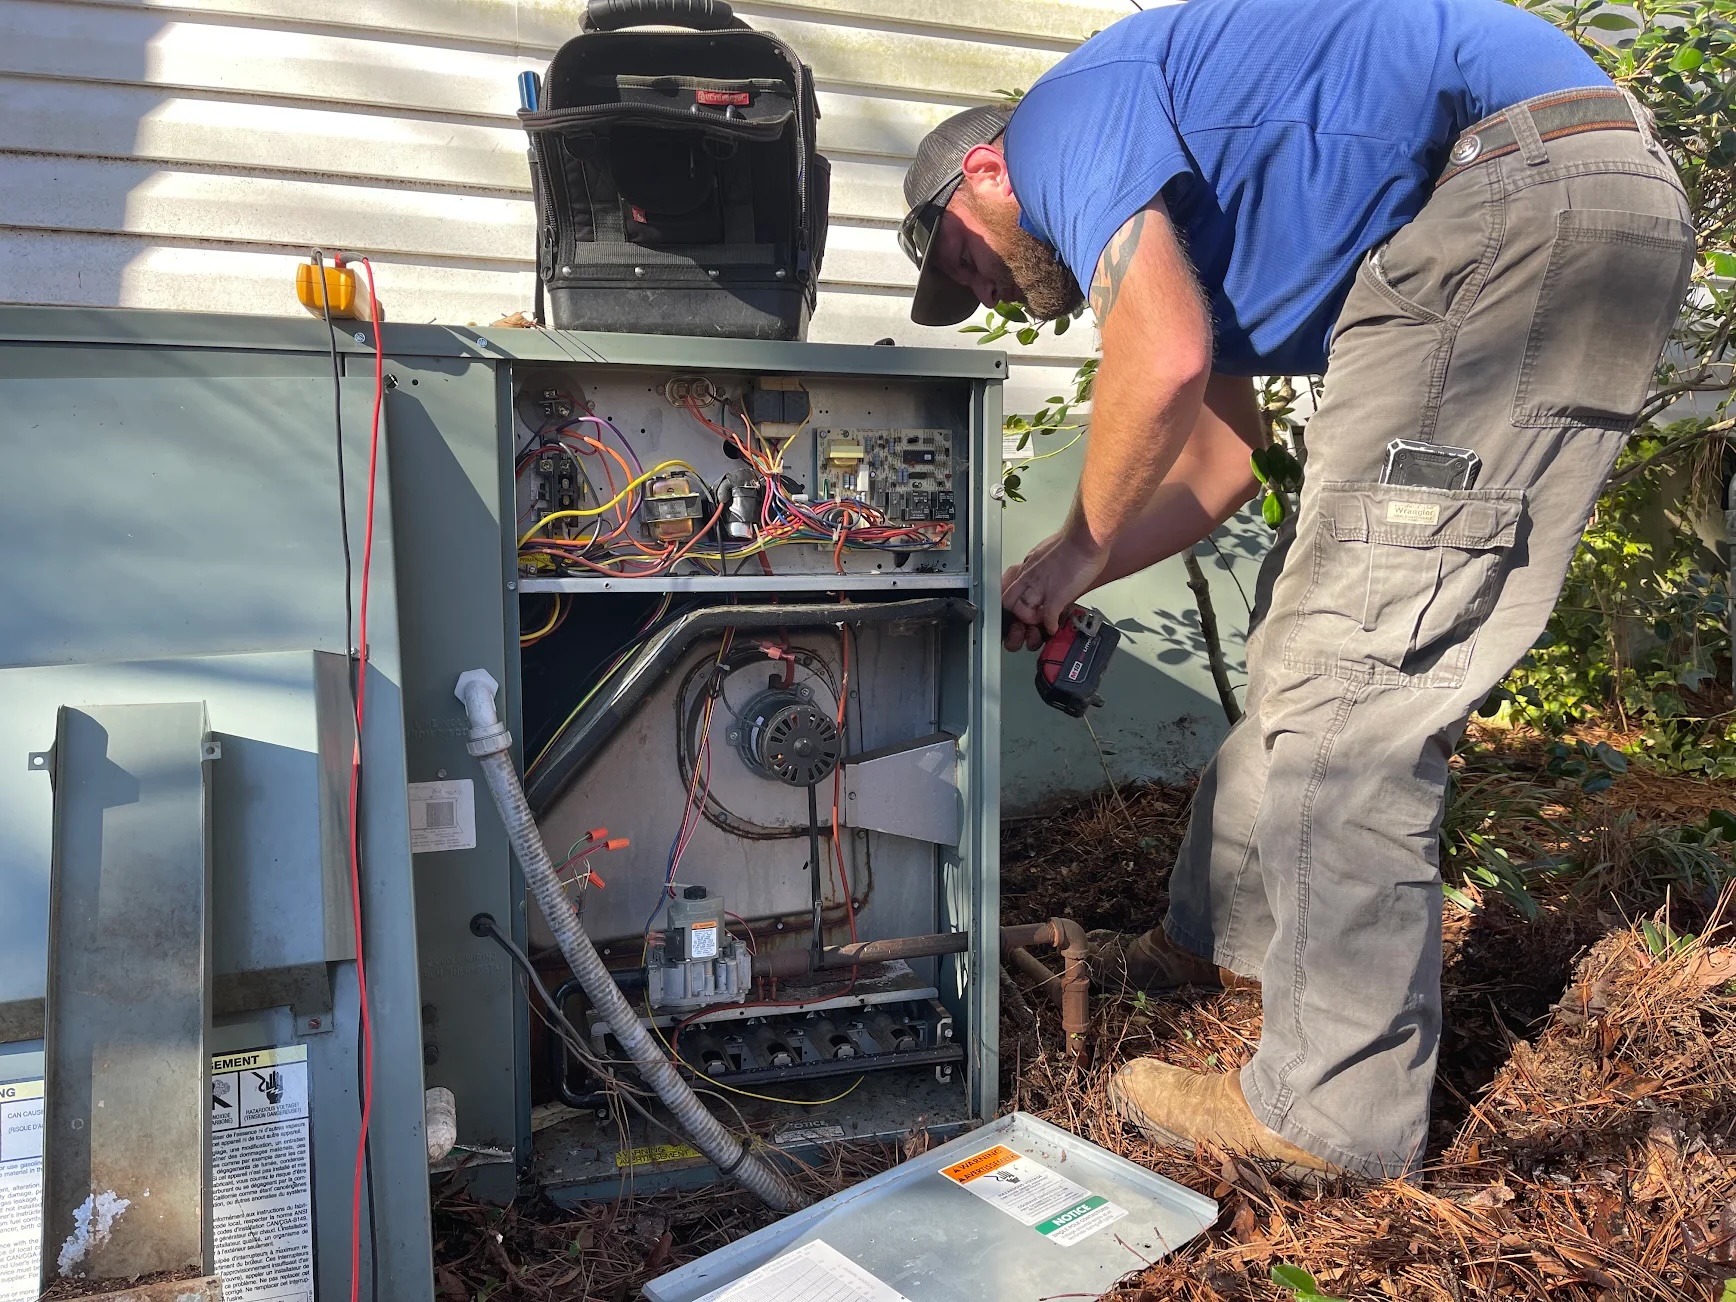 Atlas Heating and Air Conditioning Inc Offers Comprehensive AC Services to the Greater Augusta, GA Area